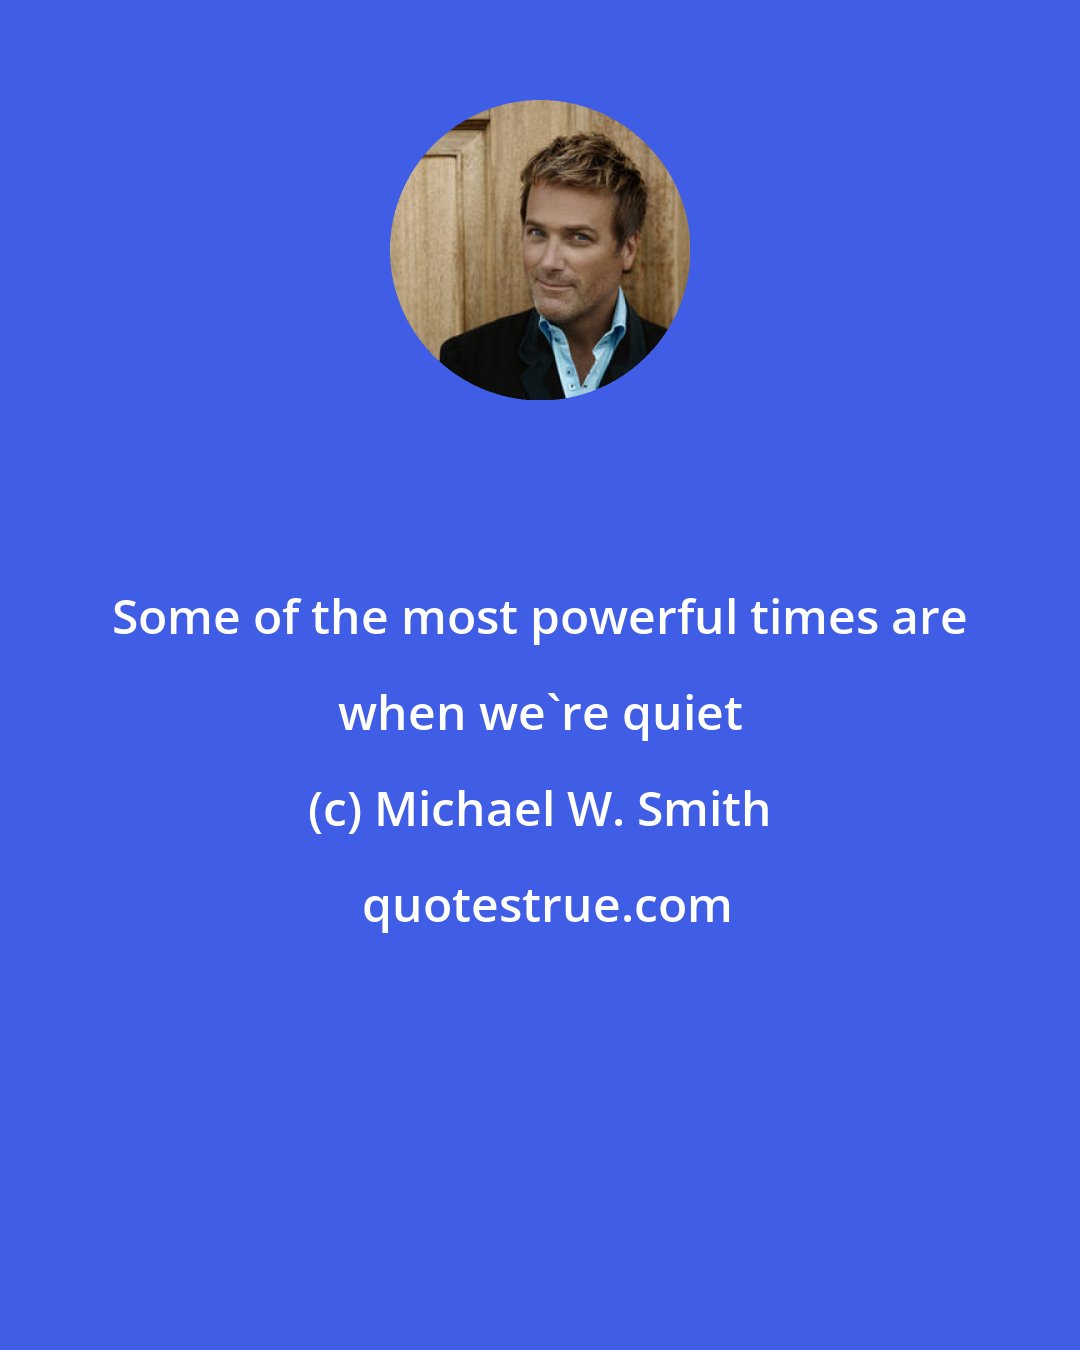 Michael W. Smith: Some of the most powerful times are when we're quiet